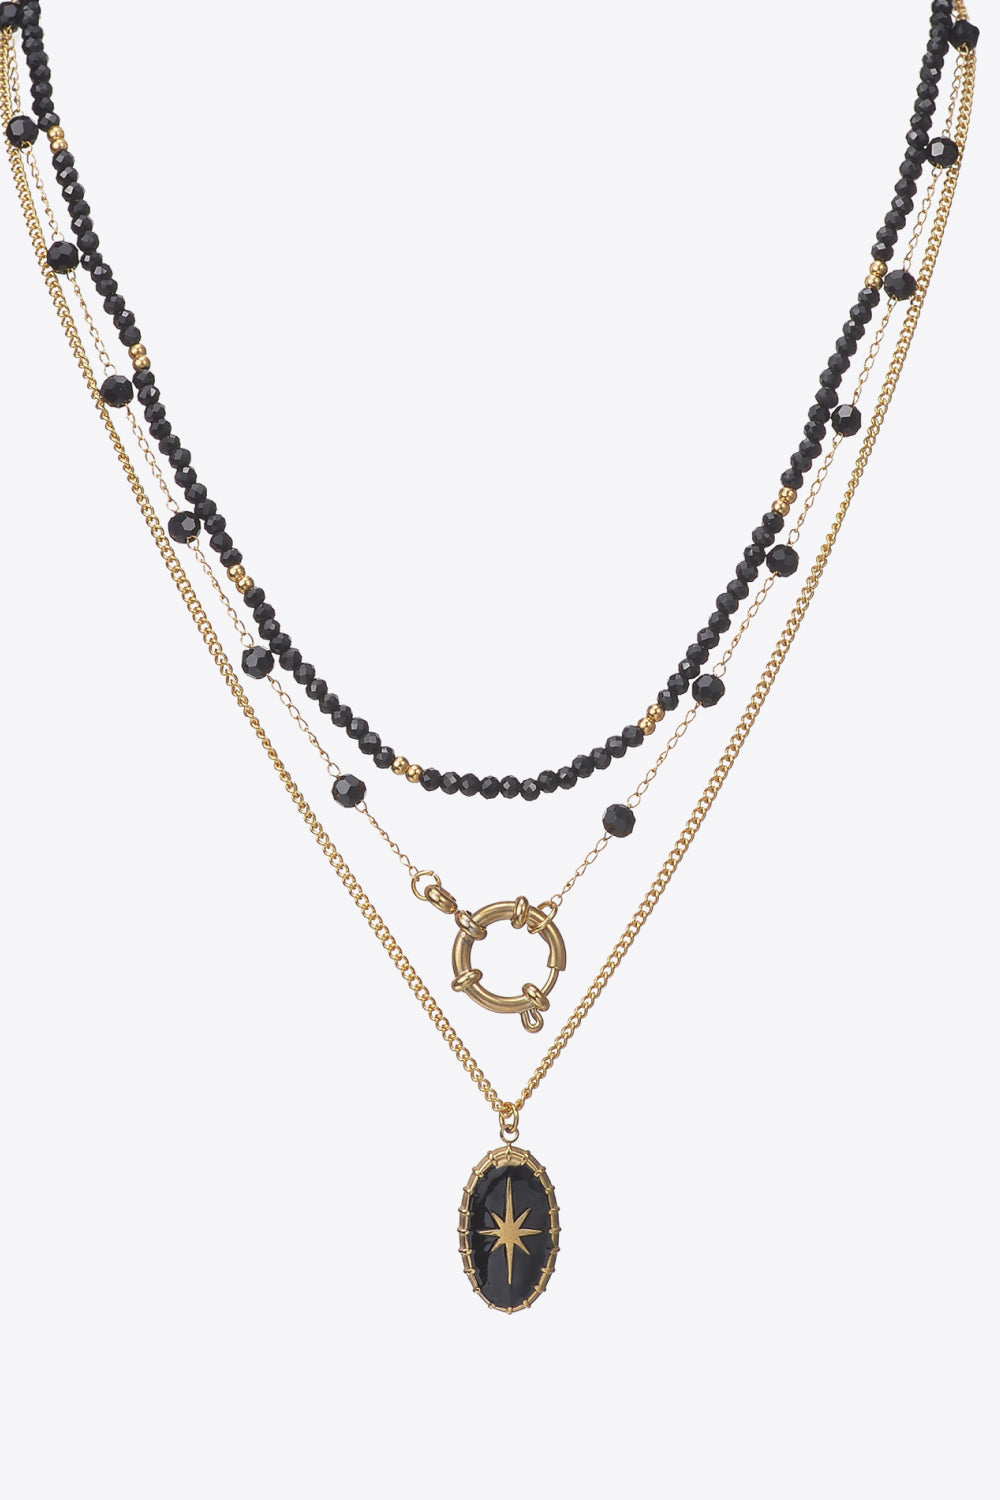 BLACK/GOLD ONE SIZE - Three-Piece Stainless Steel Necklace Set - necklace at TFC&H Co.